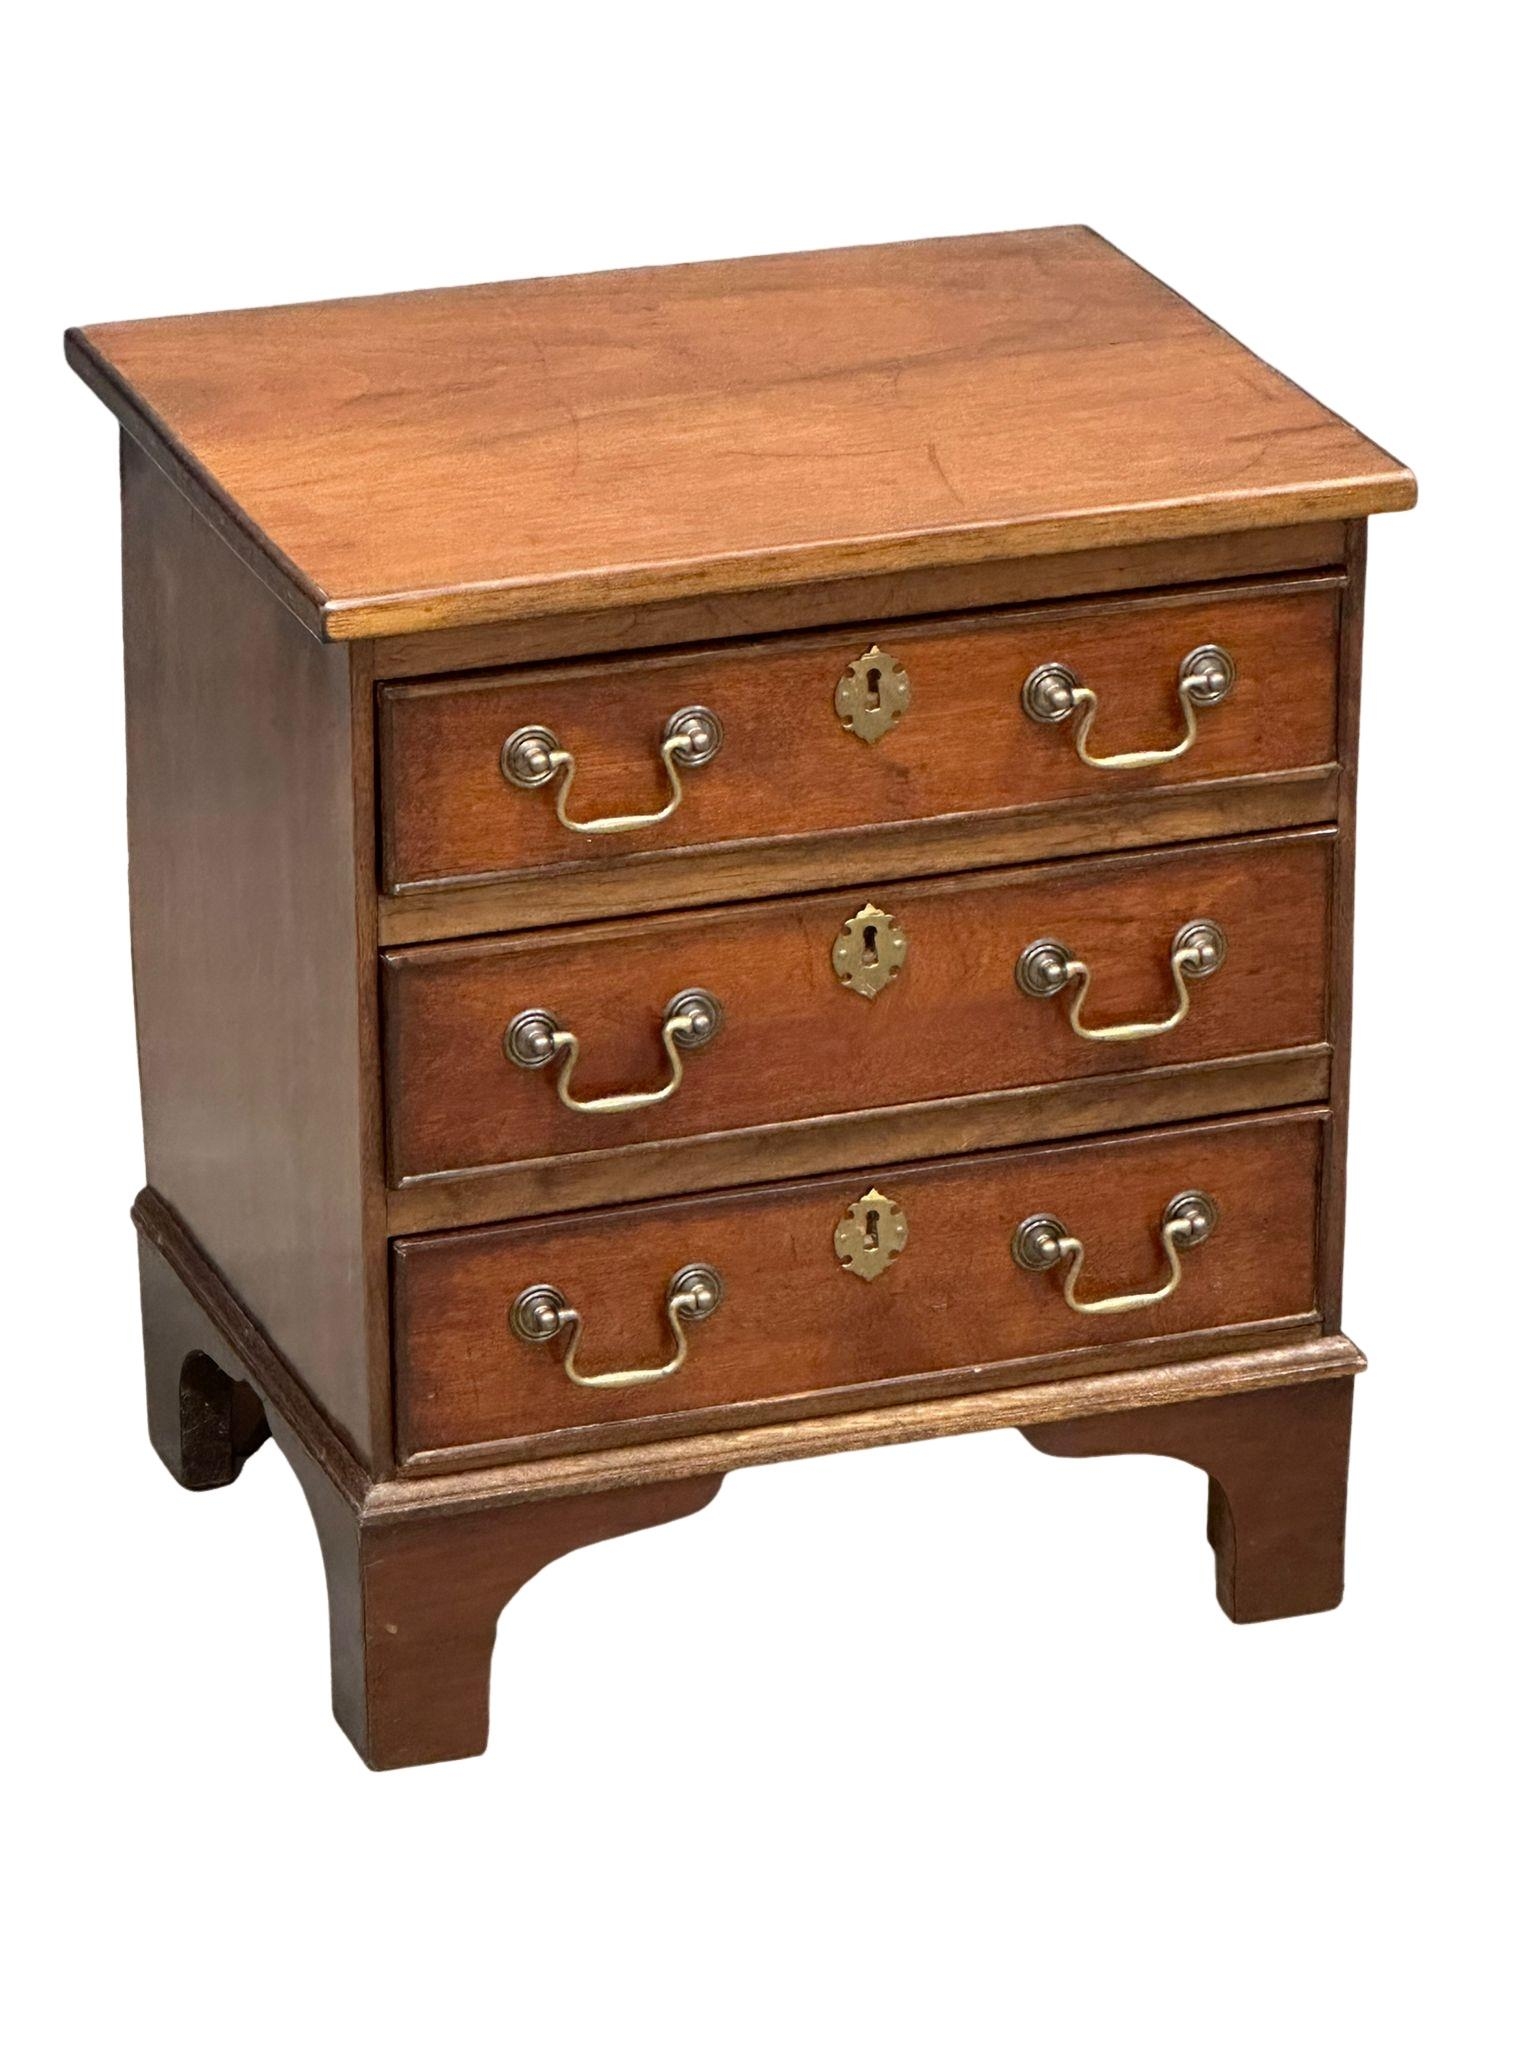 A small Georgian style chest of drawers, 46cm x 36cm x 52cm